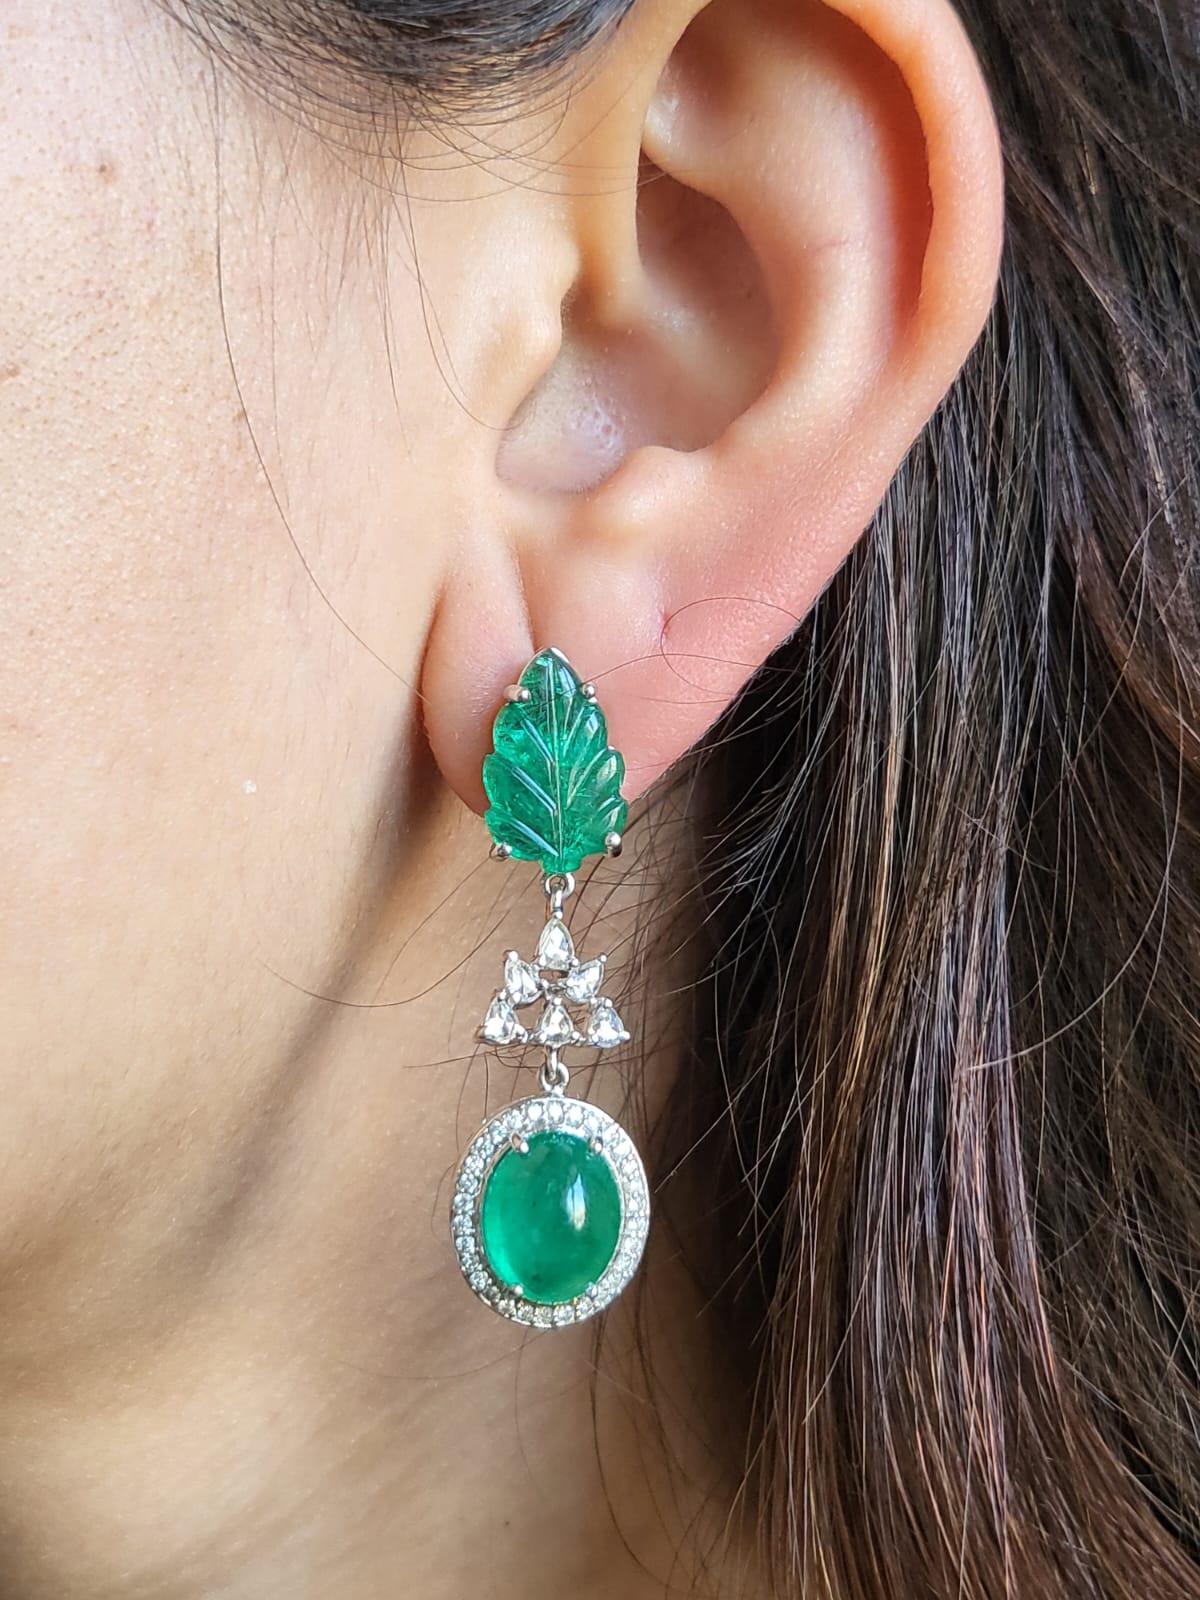 A very beautiful and gorgeous Emerald Earring set in 18K White Gold & Diamonds. The weight of the carved & cabochon Emerald is 5.85 carats and 7.69 carats, respectively. Both the Emeralds are completely natural, without any treatment is of Zambian